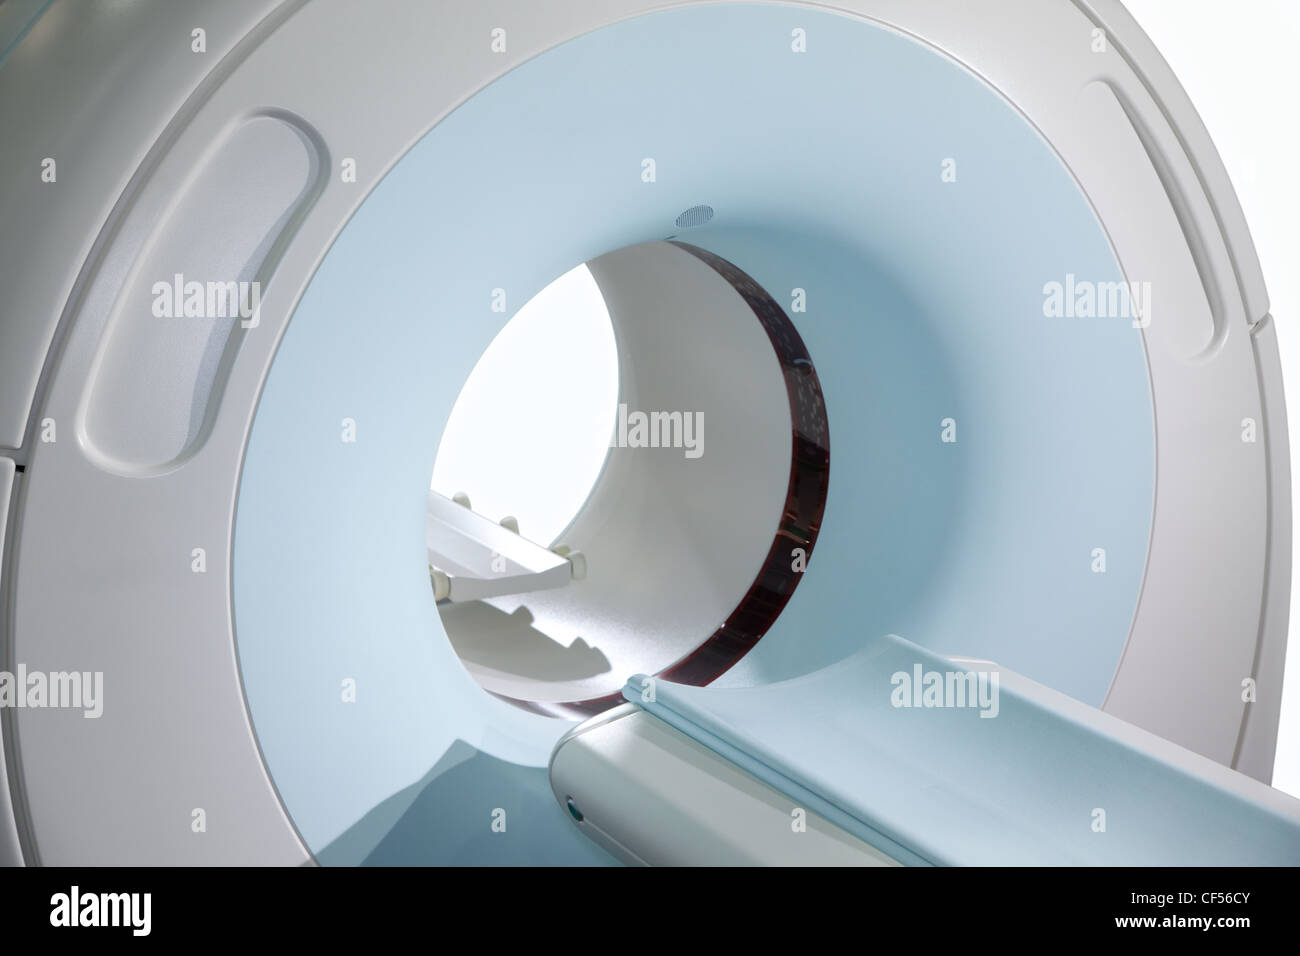 Complete CAT Scan System in a Hospital Environment. Magnetic resonance imaging scan. Isolated. Stock Photo